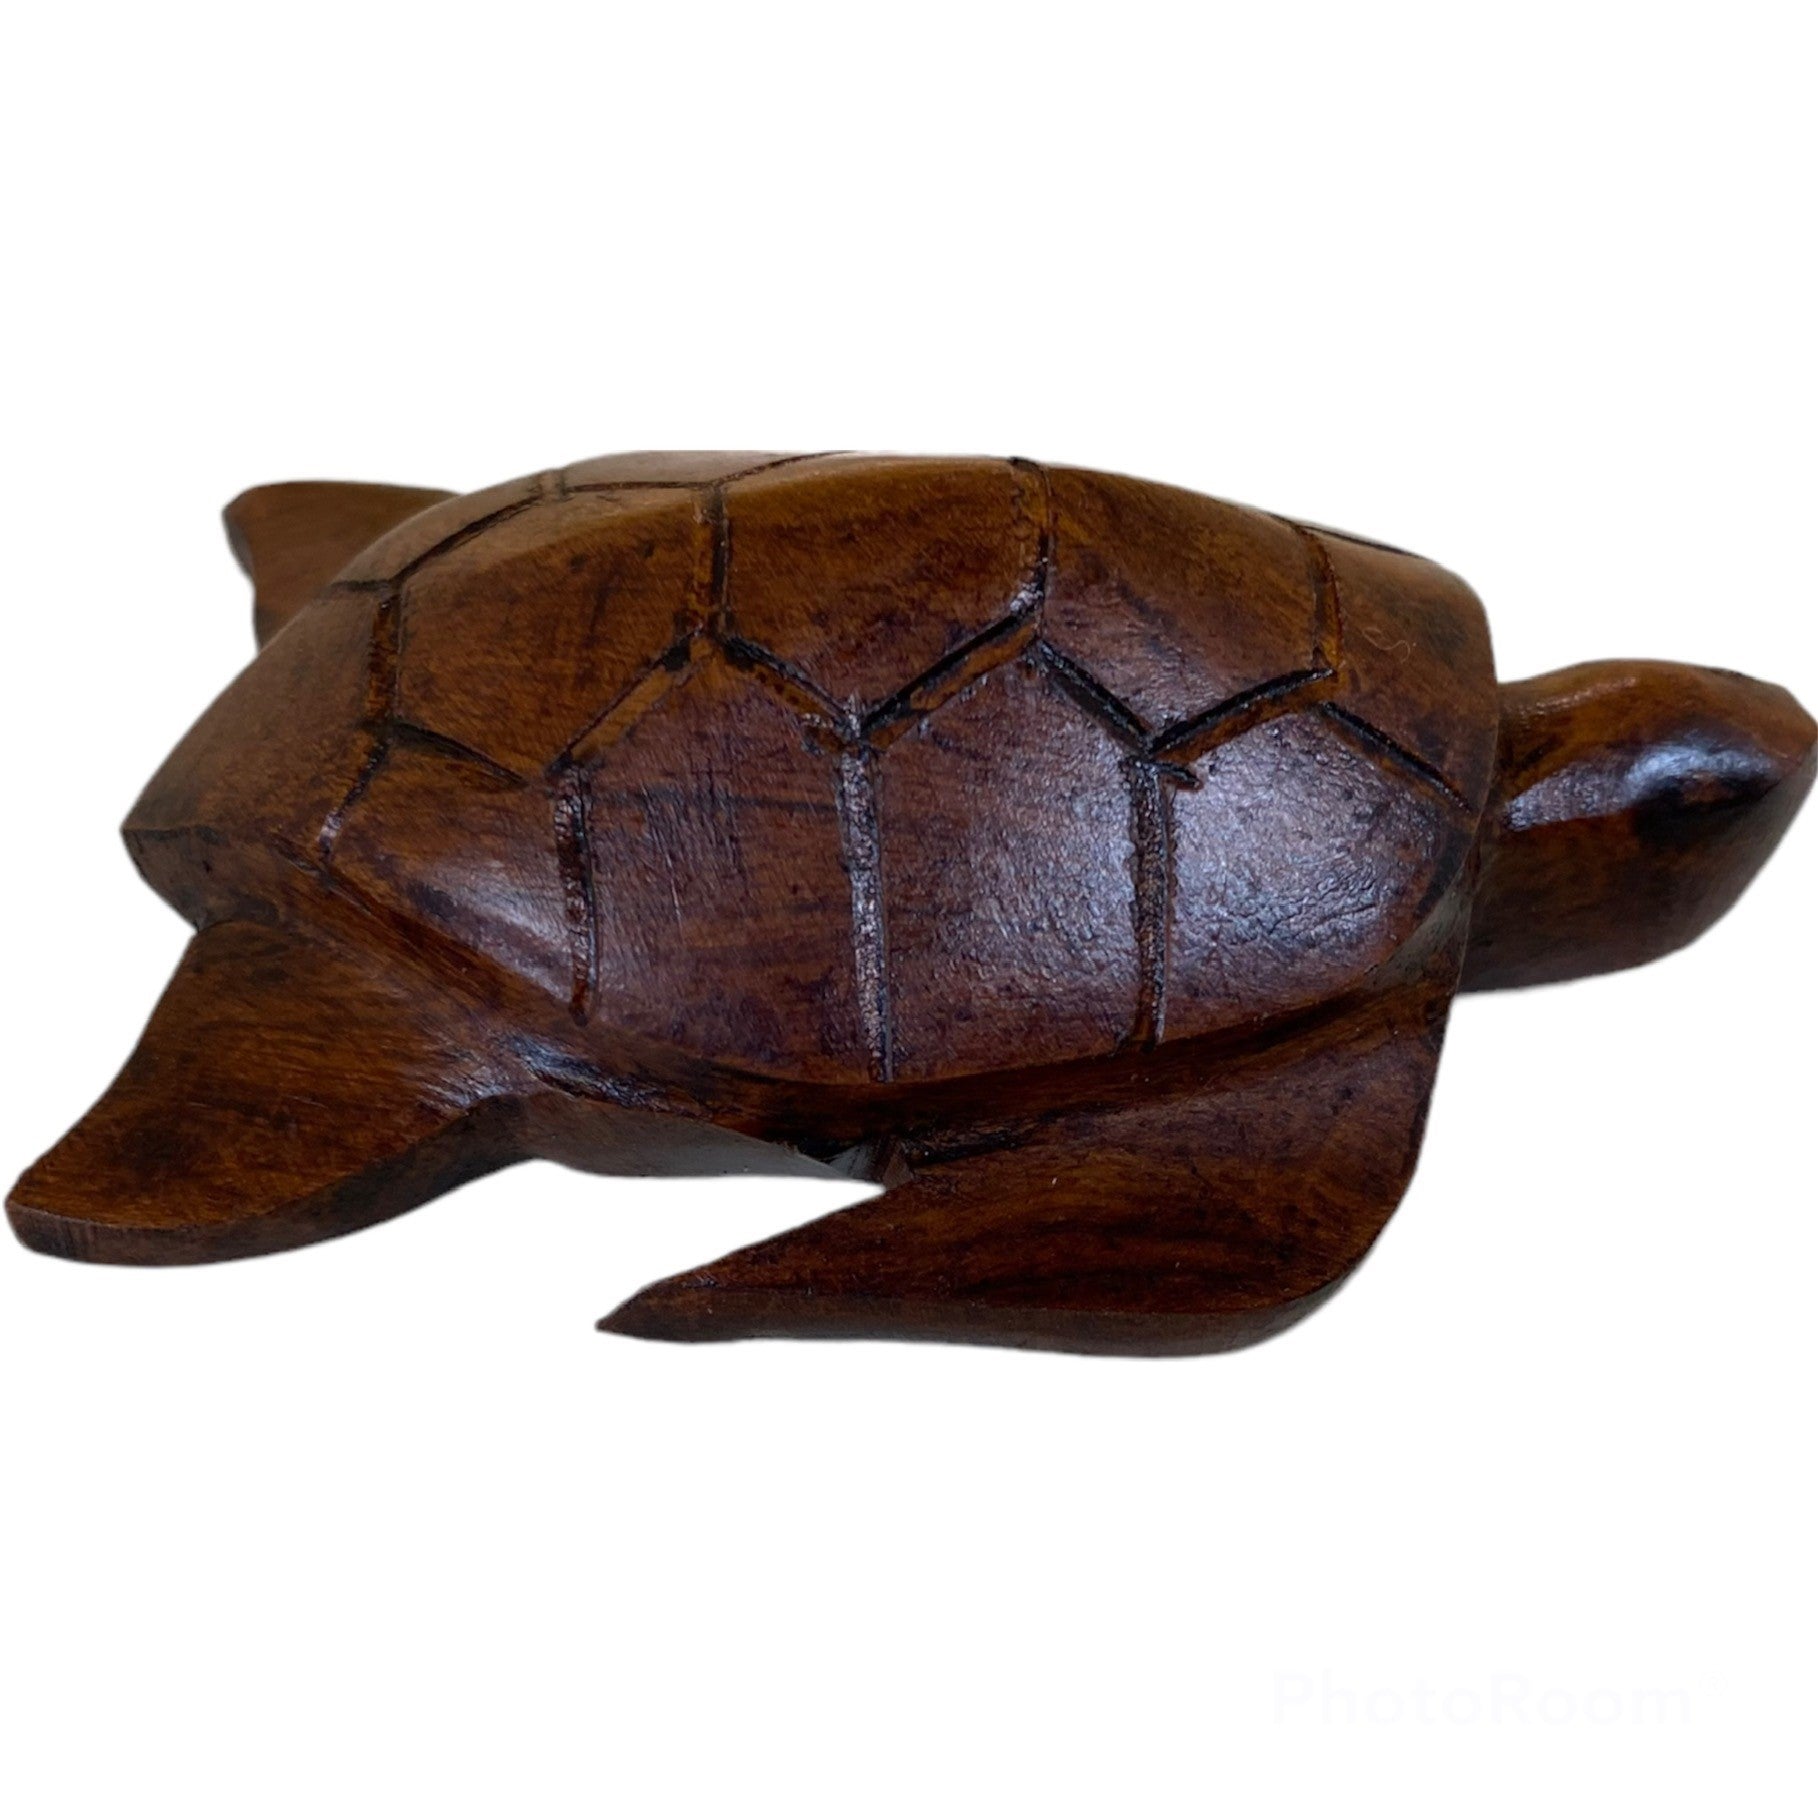 Ironwood Sea Turtle made in Mexico Turtle Figurine Wood Carving 6.5’, 5 - Tobmarc Home Decor & Gifts 